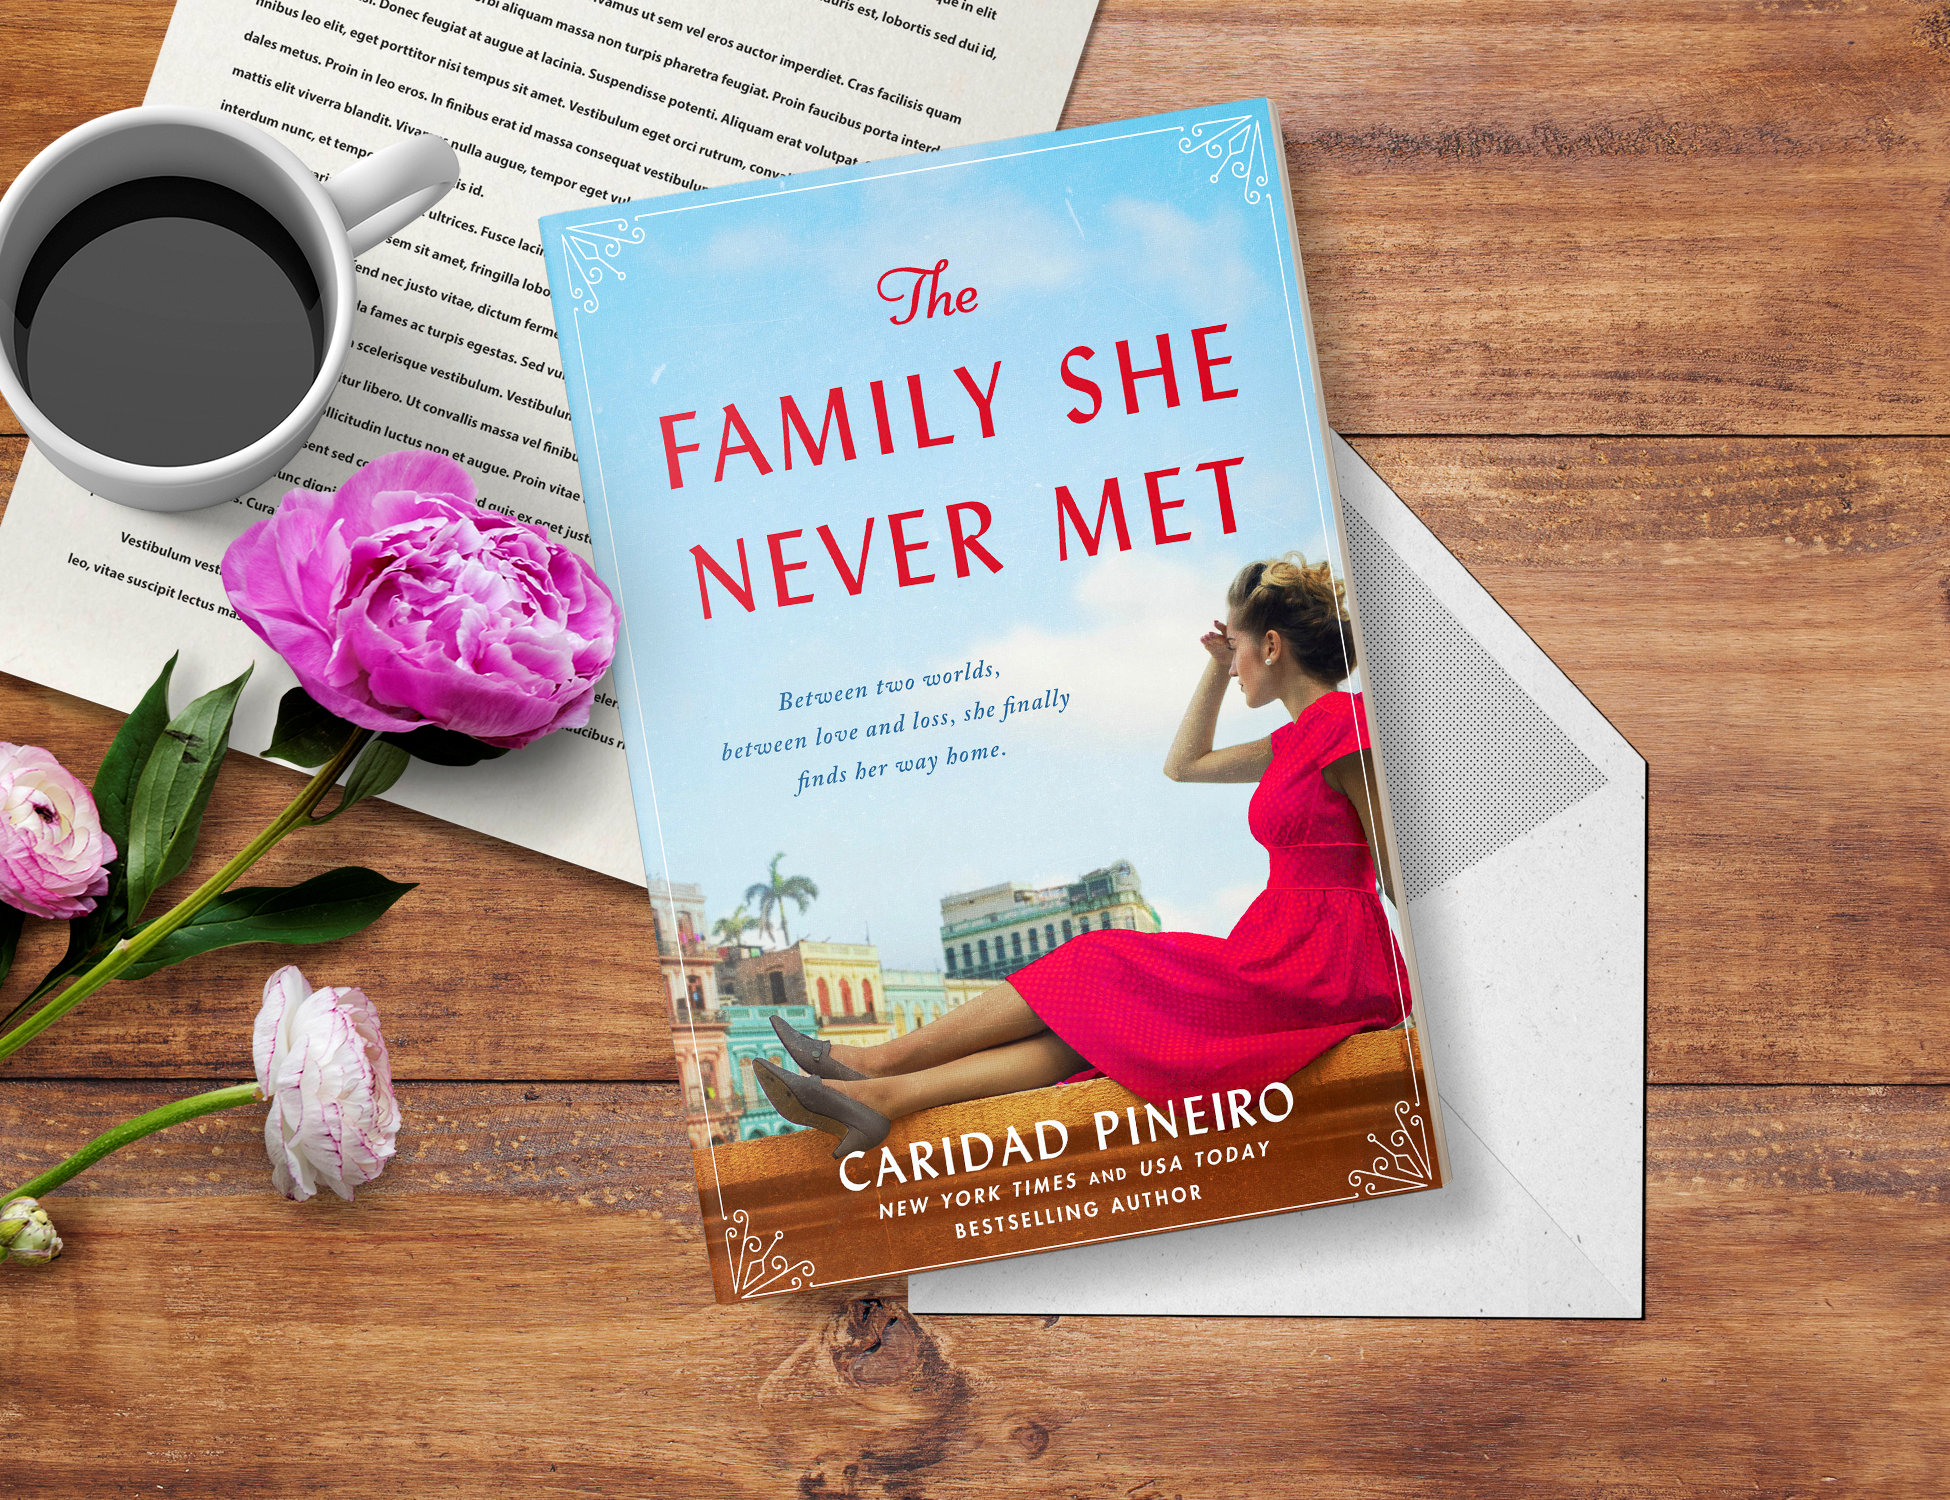 Bestselling Author Caridad Pineiro’s "The Family She Never Met" Is Out Now